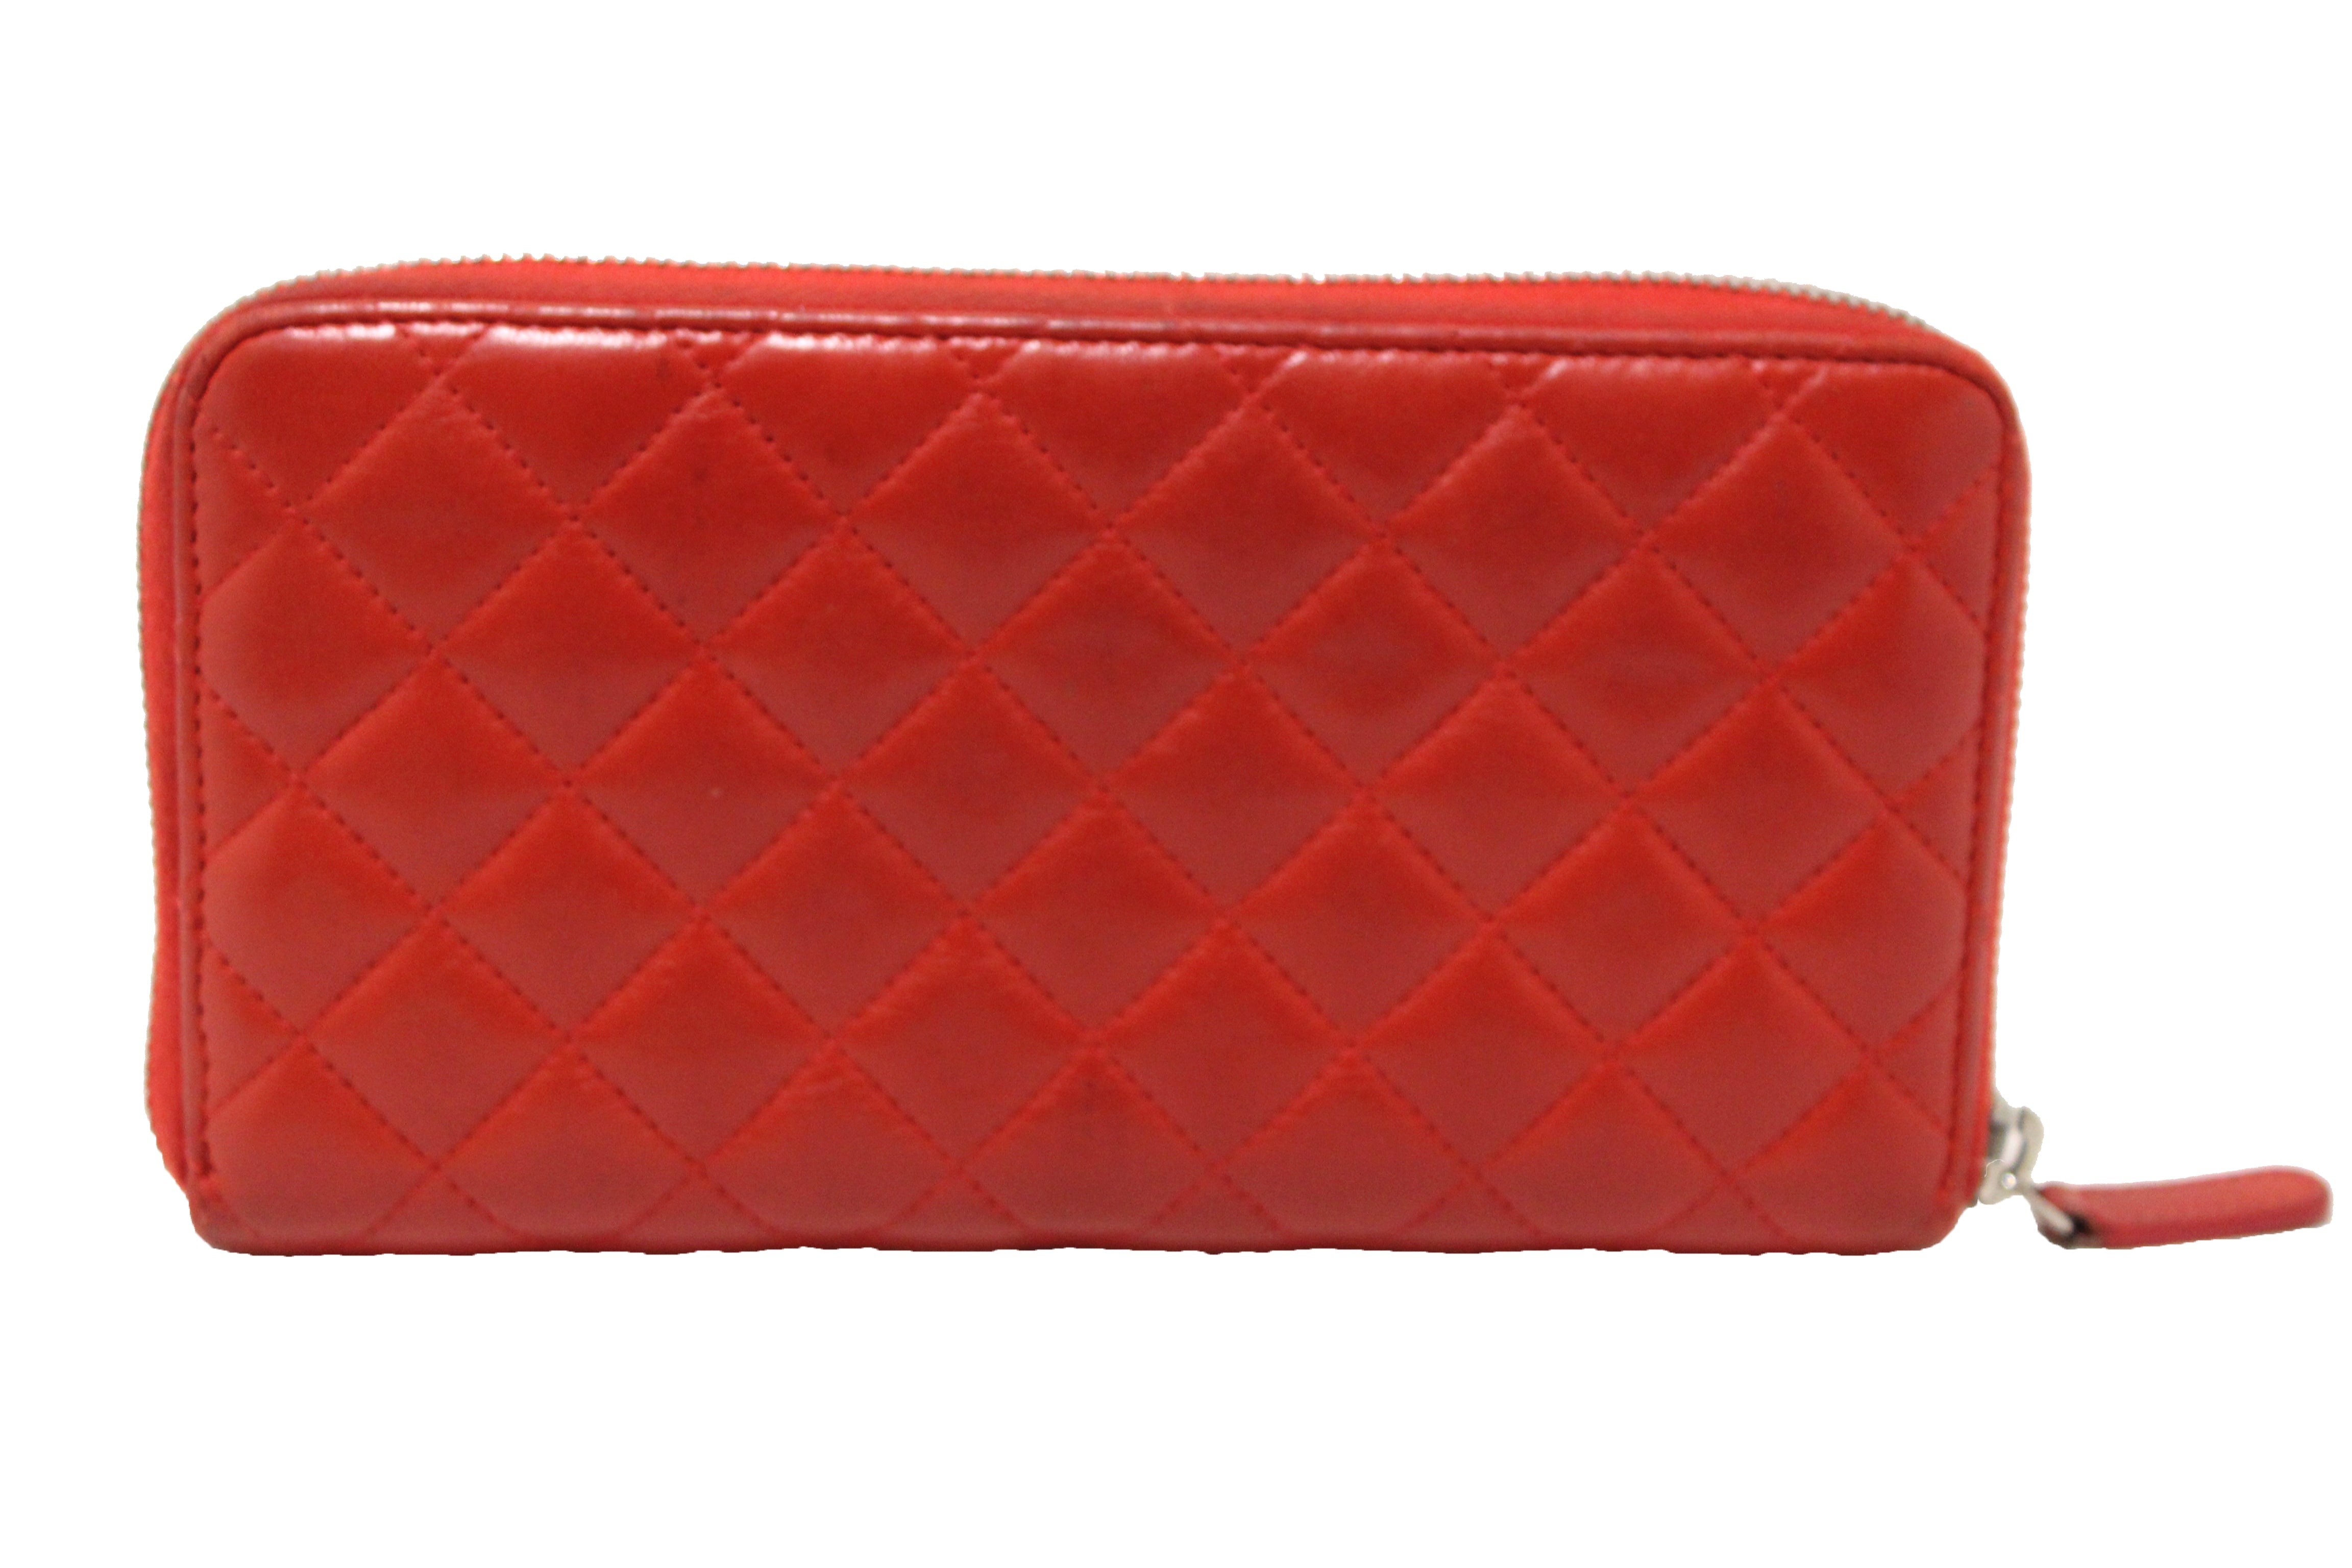 Authentic Chanel Red Quilted Lambskin Leather Zippy Wallet